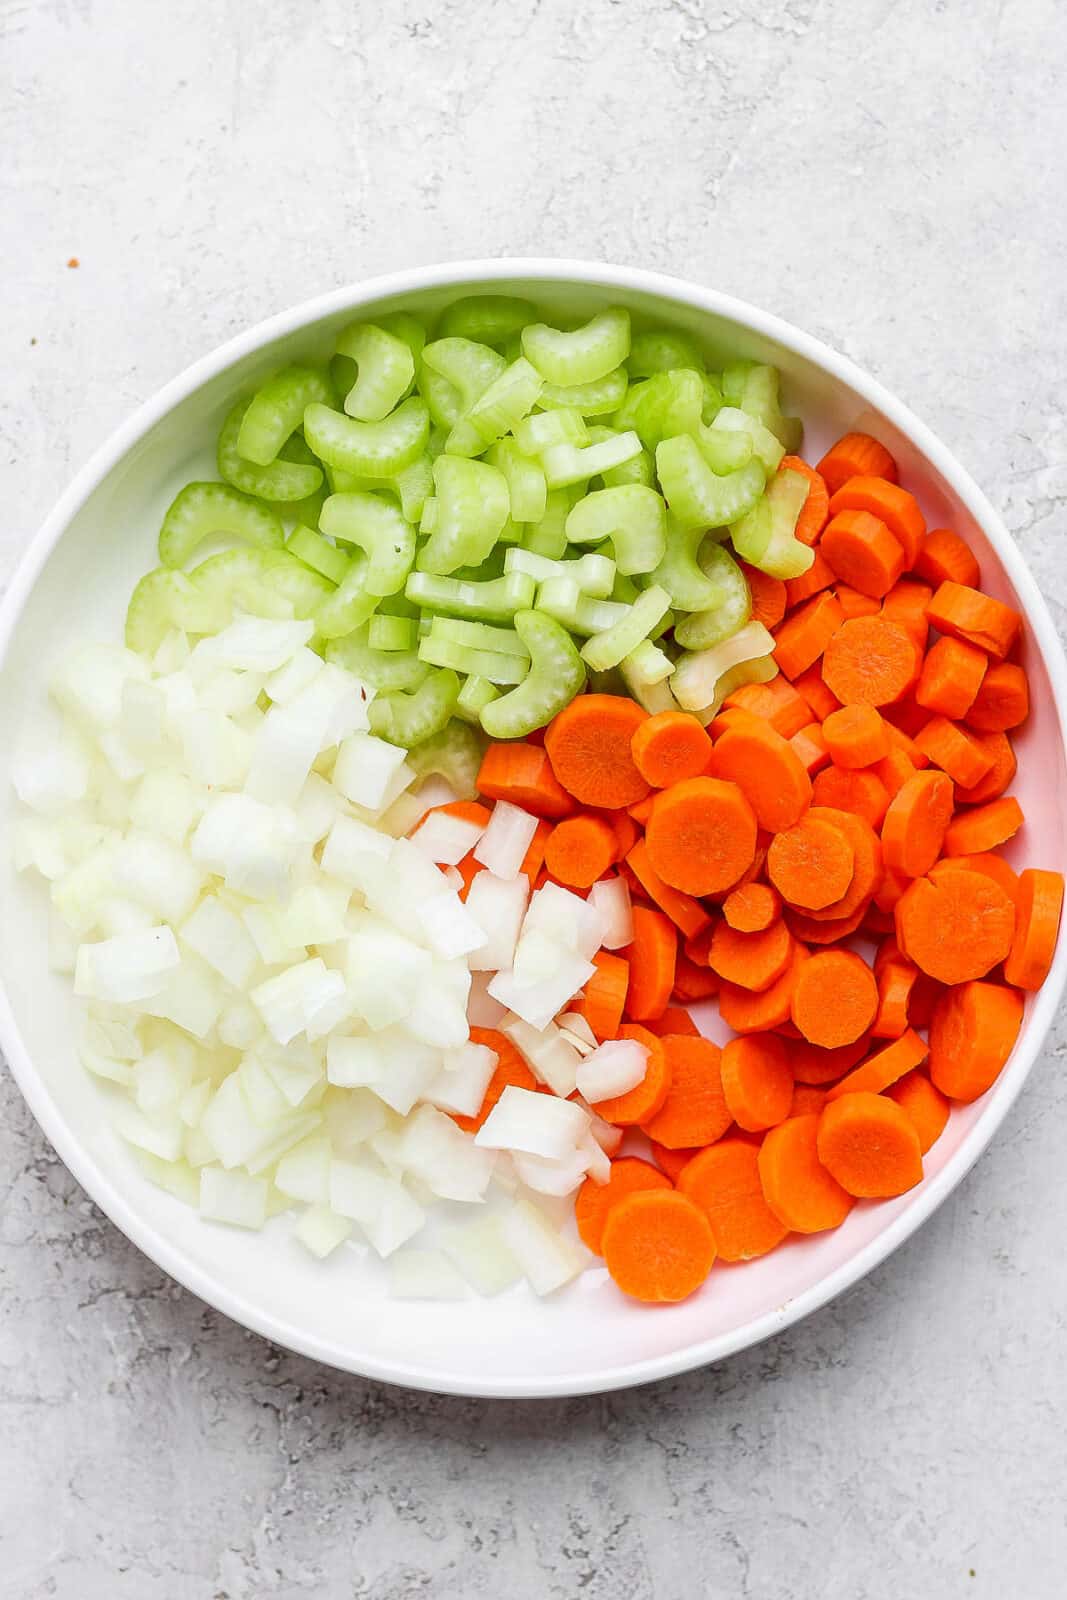 Cut up onion, celery, and carrots.